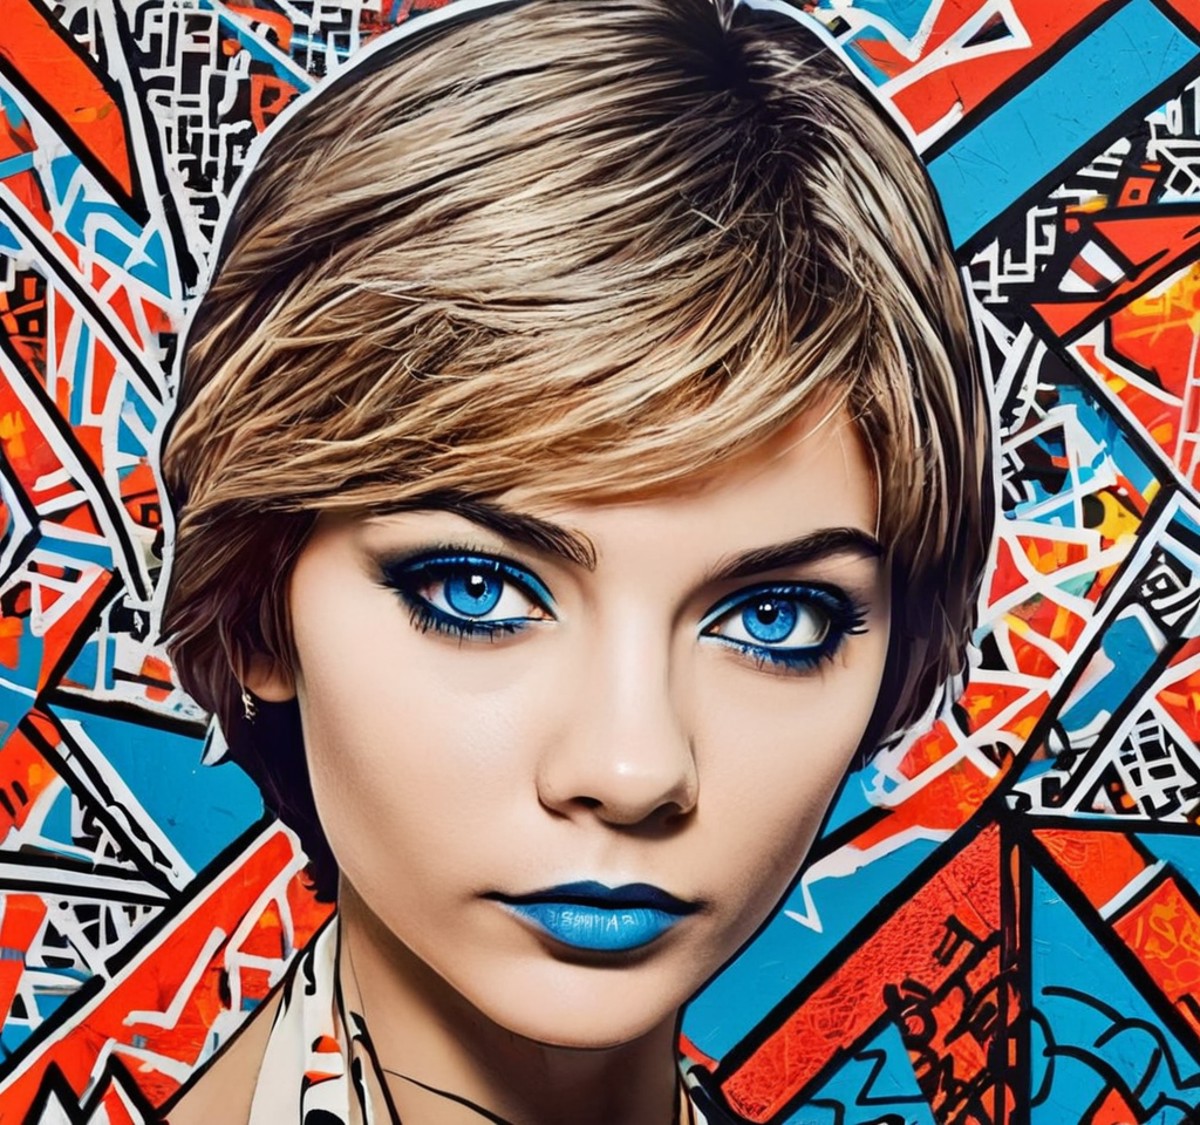 stenciled portrait, pop art style, inspired by Keith Haring, handsome young Woman Alisa Selezneva short hair, big blue eye...